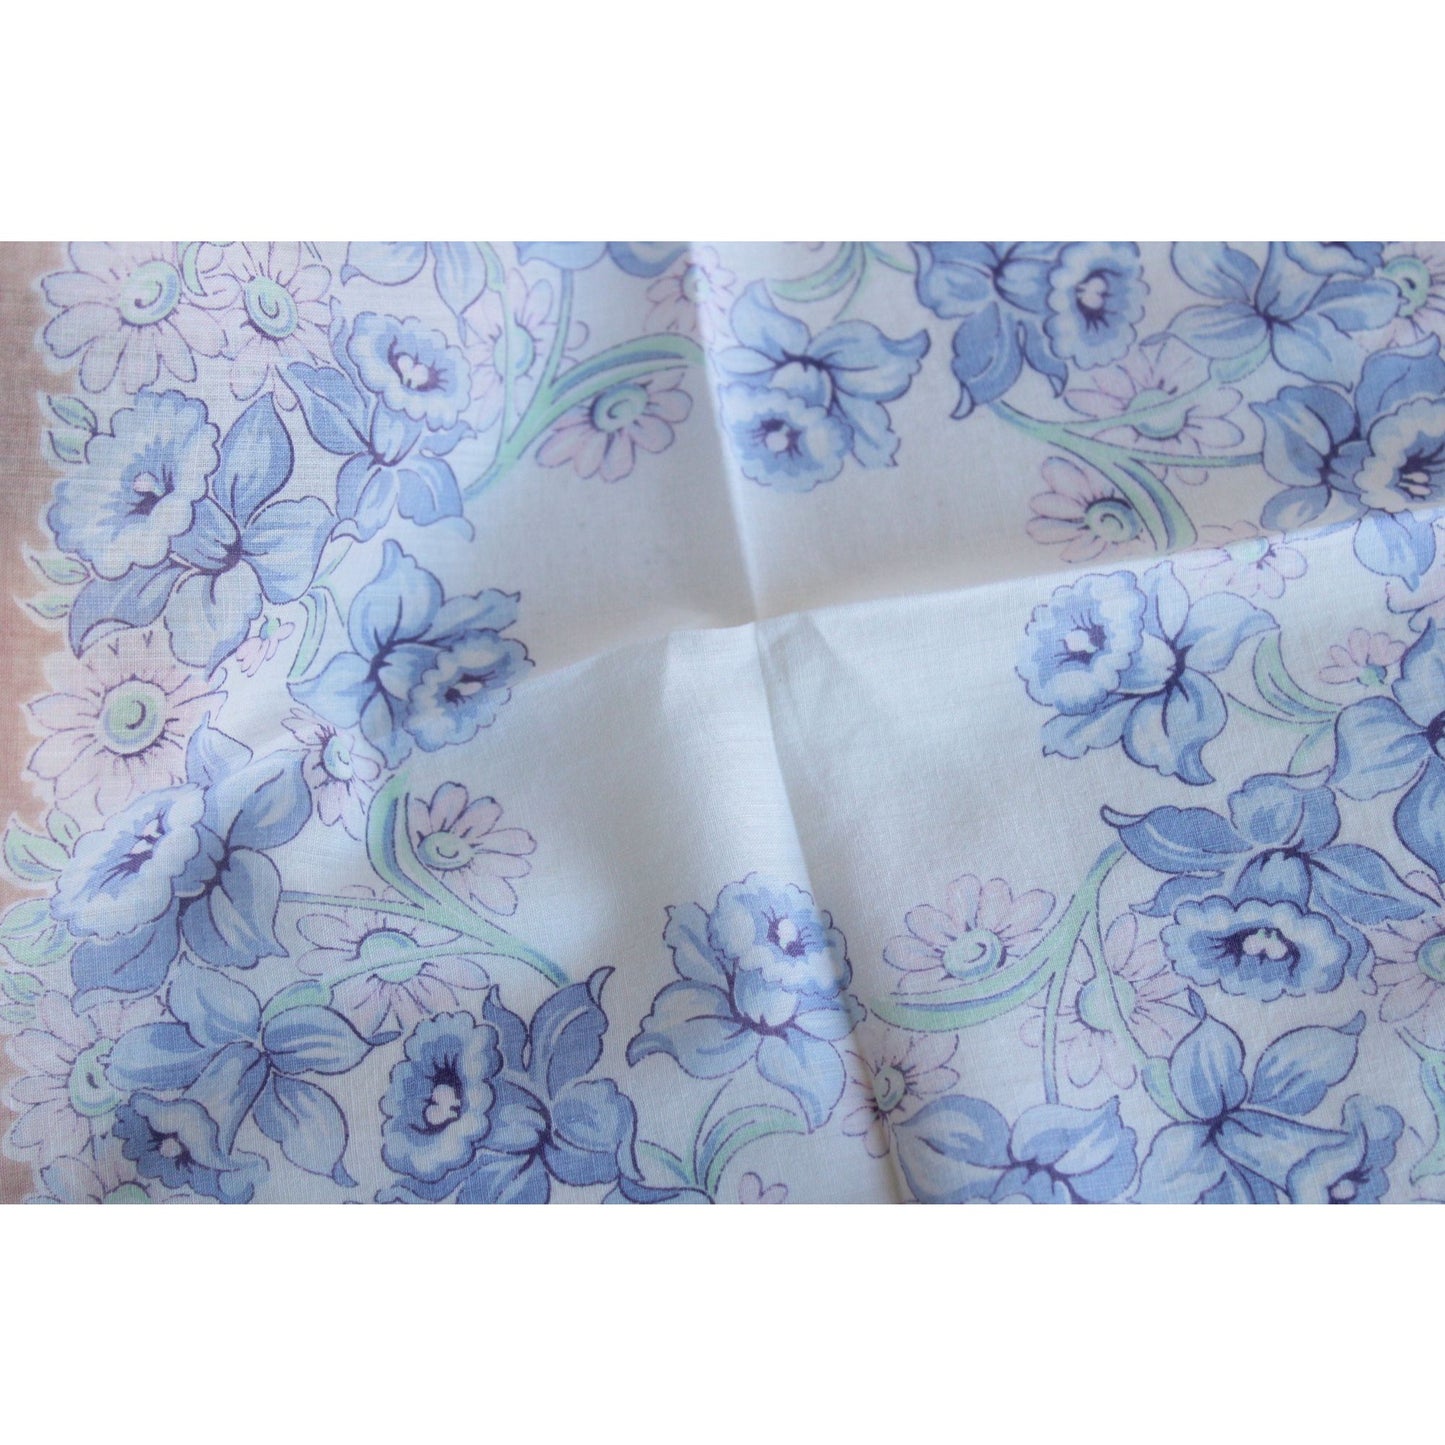 Vintage Blue and Brown Flower Print Cotton Hanky